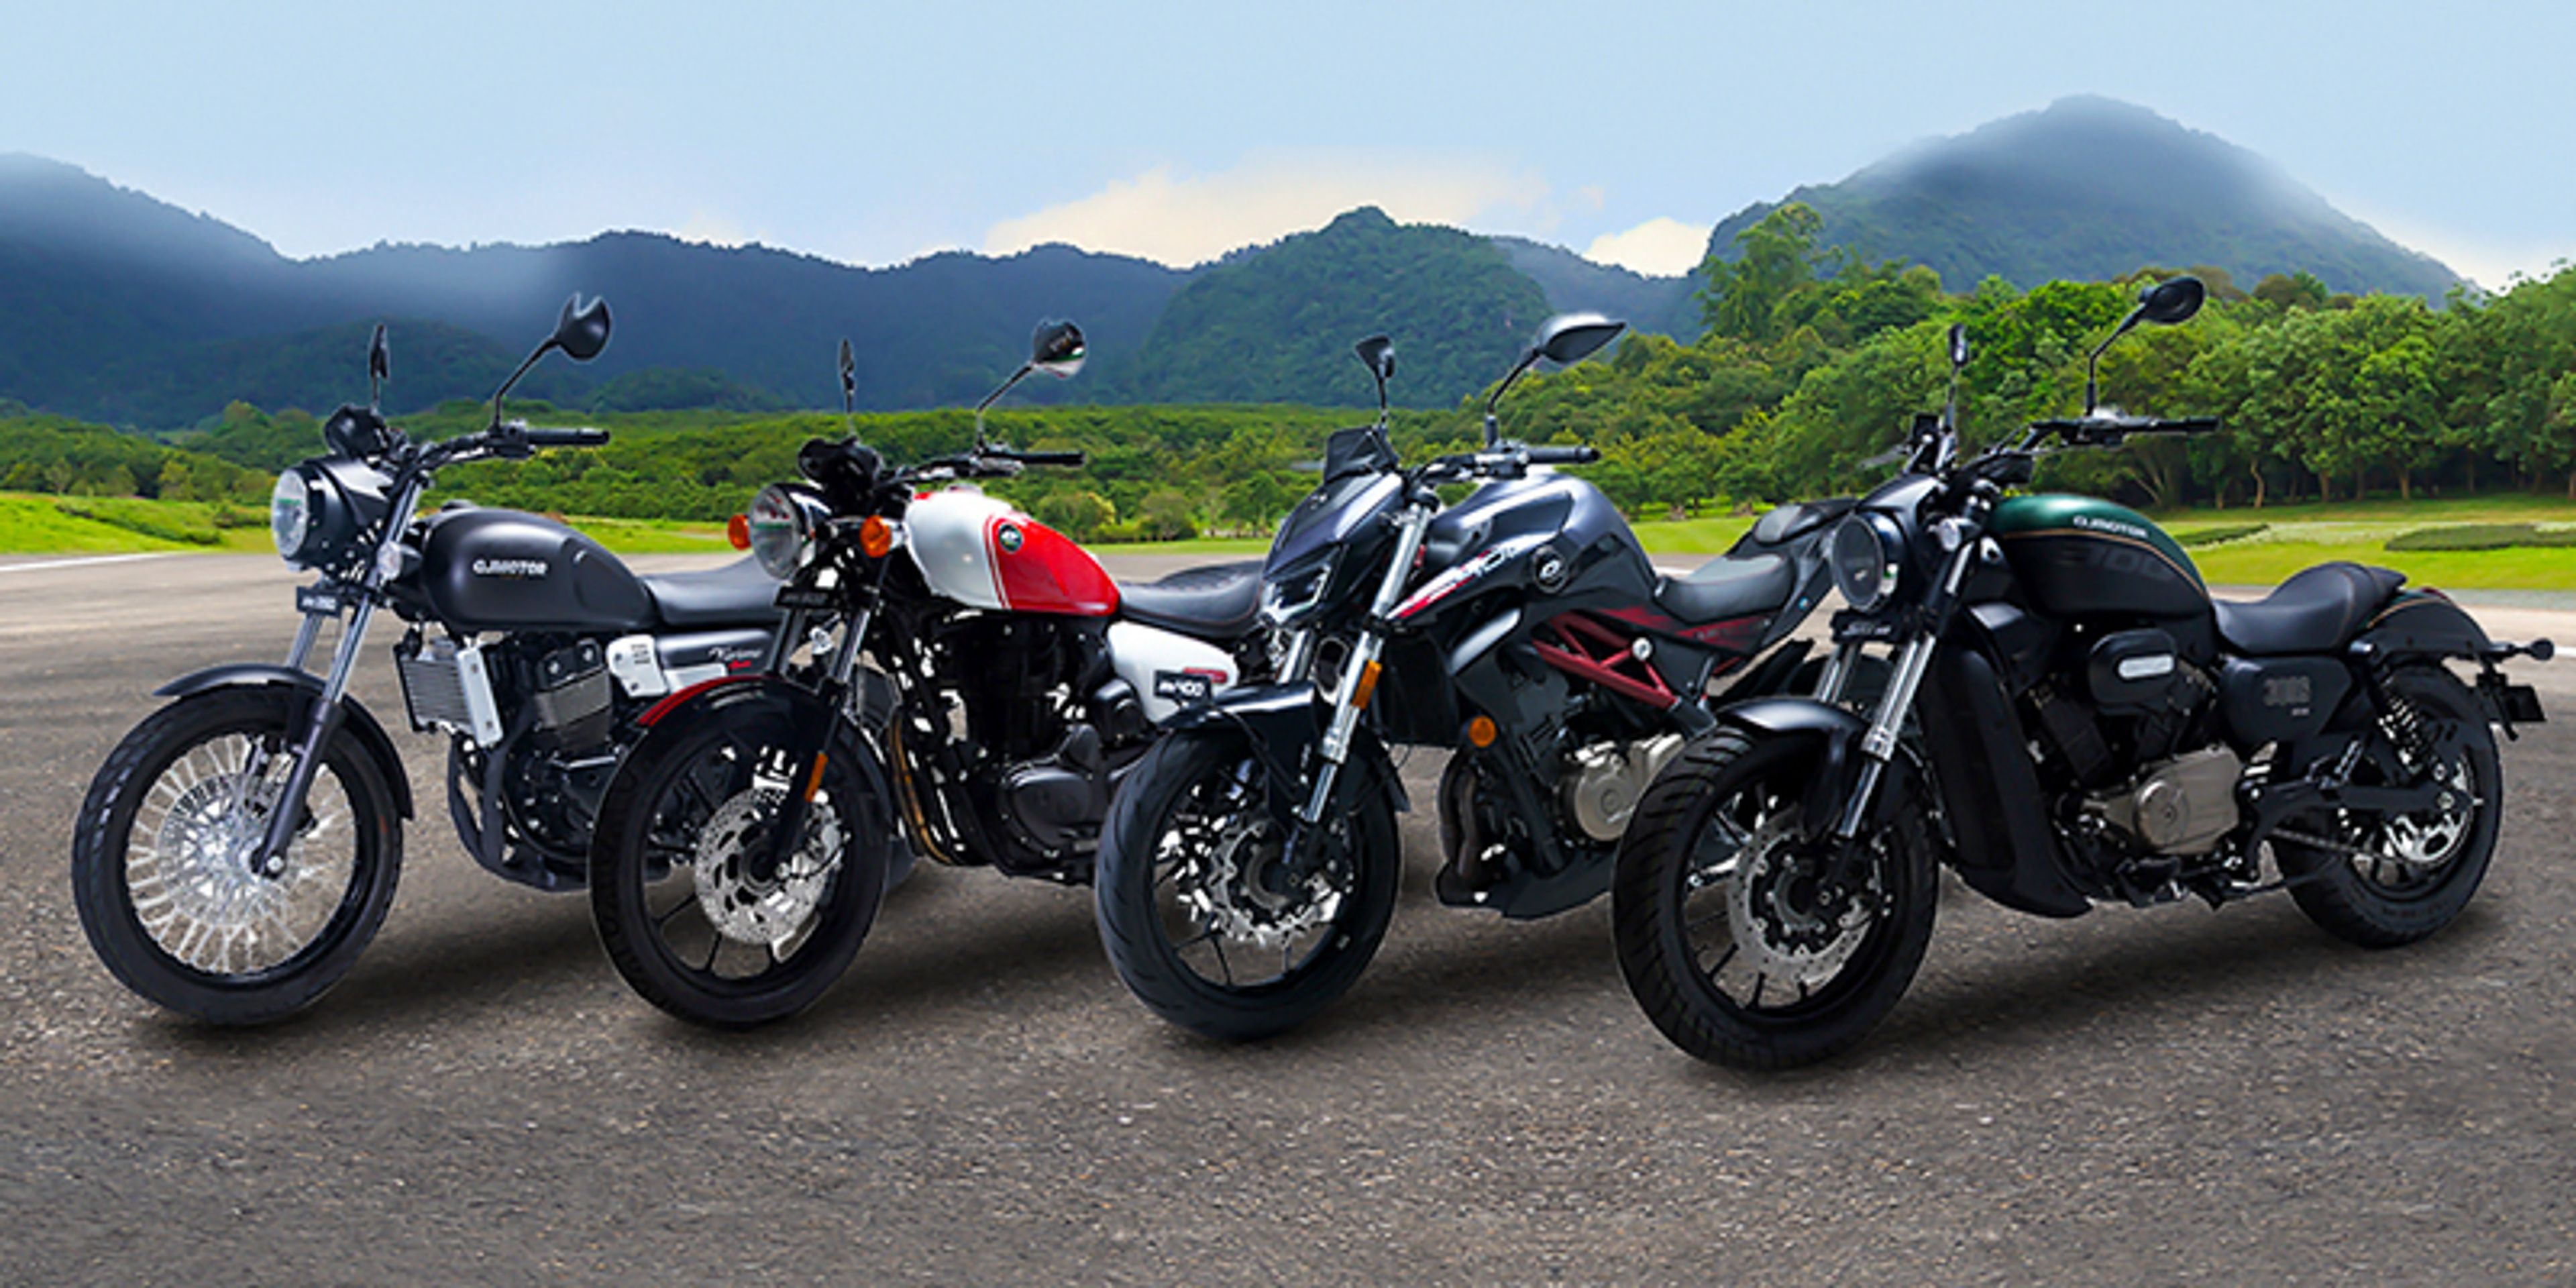 QJ Motors marks India entry with the launch of four new motorcycles